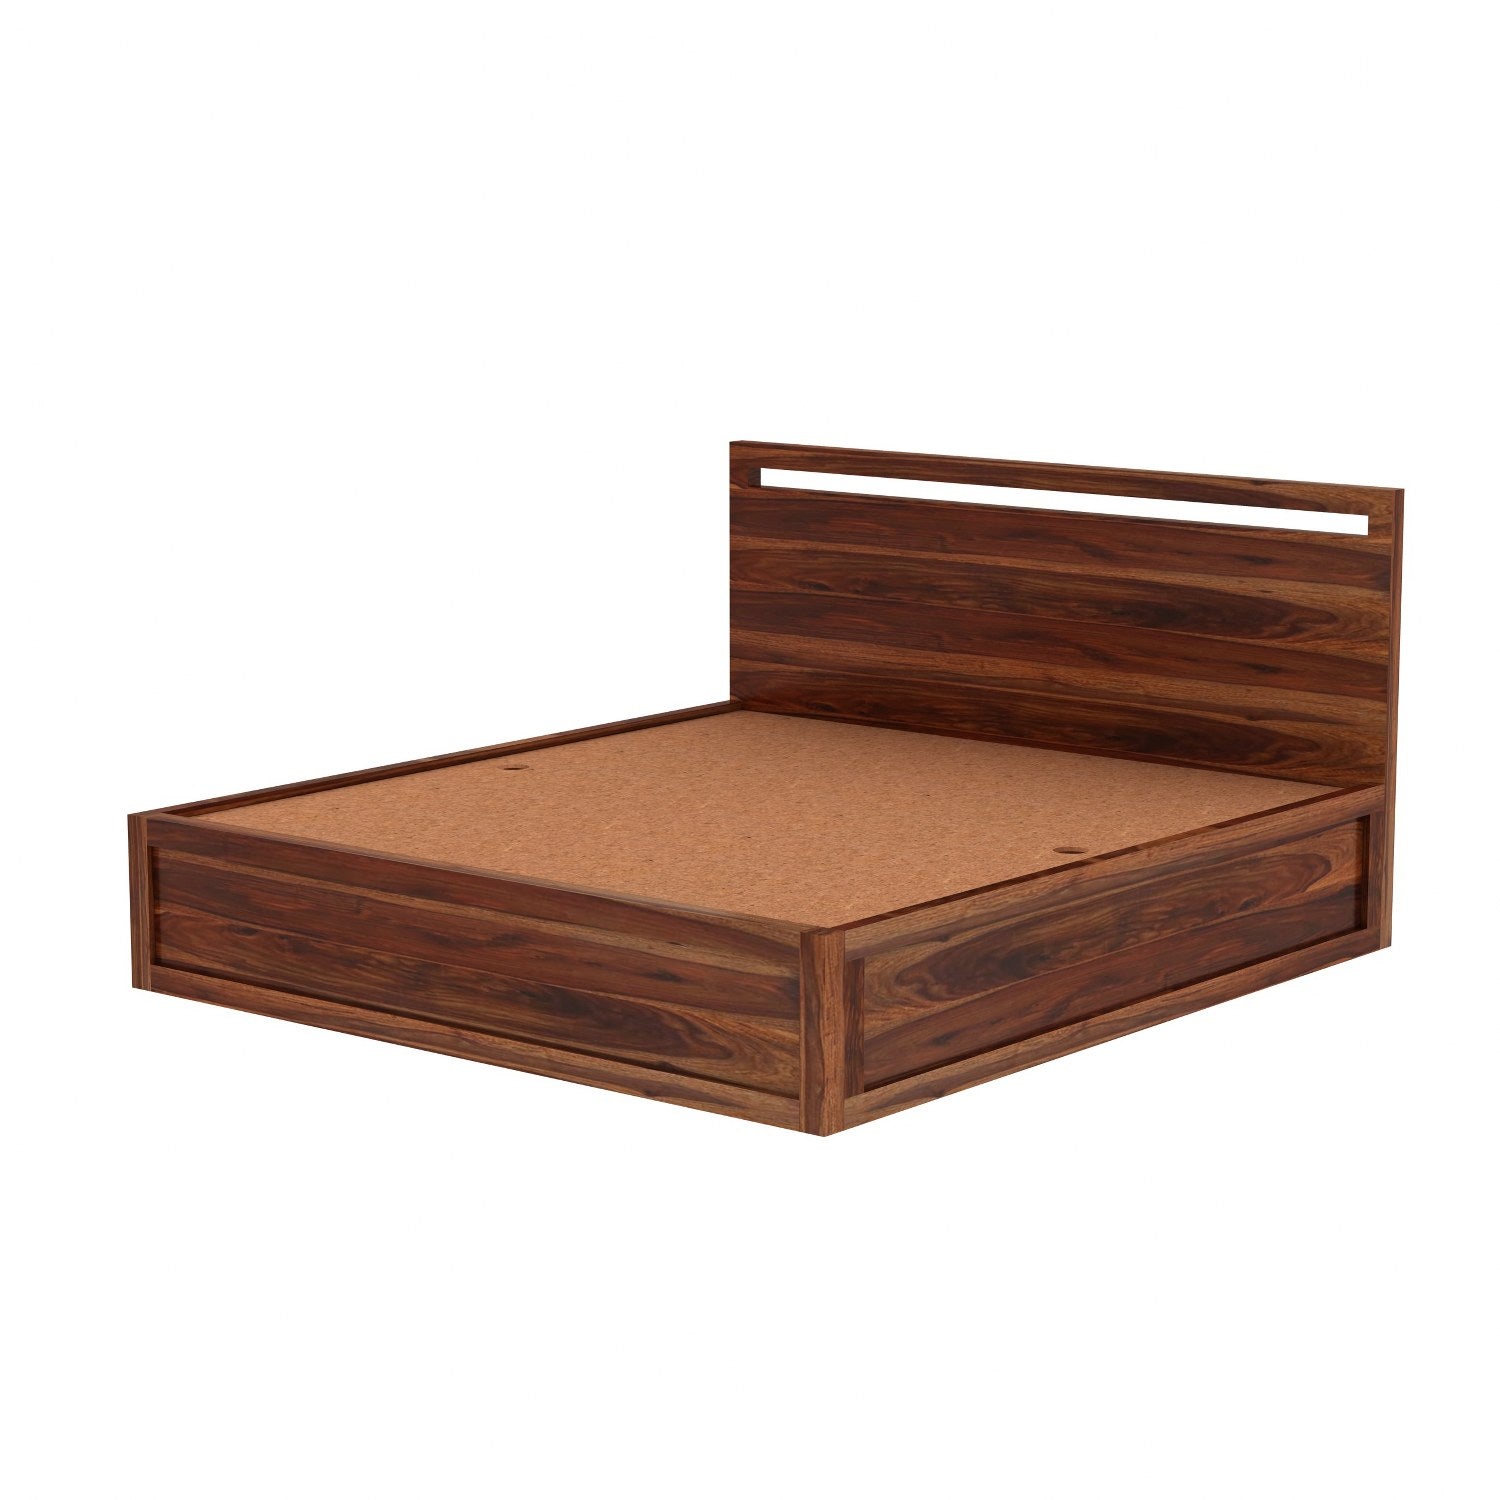 Livinn Solid Sheesham Wood Bed With Box Storage (King Size, Natural Finish)